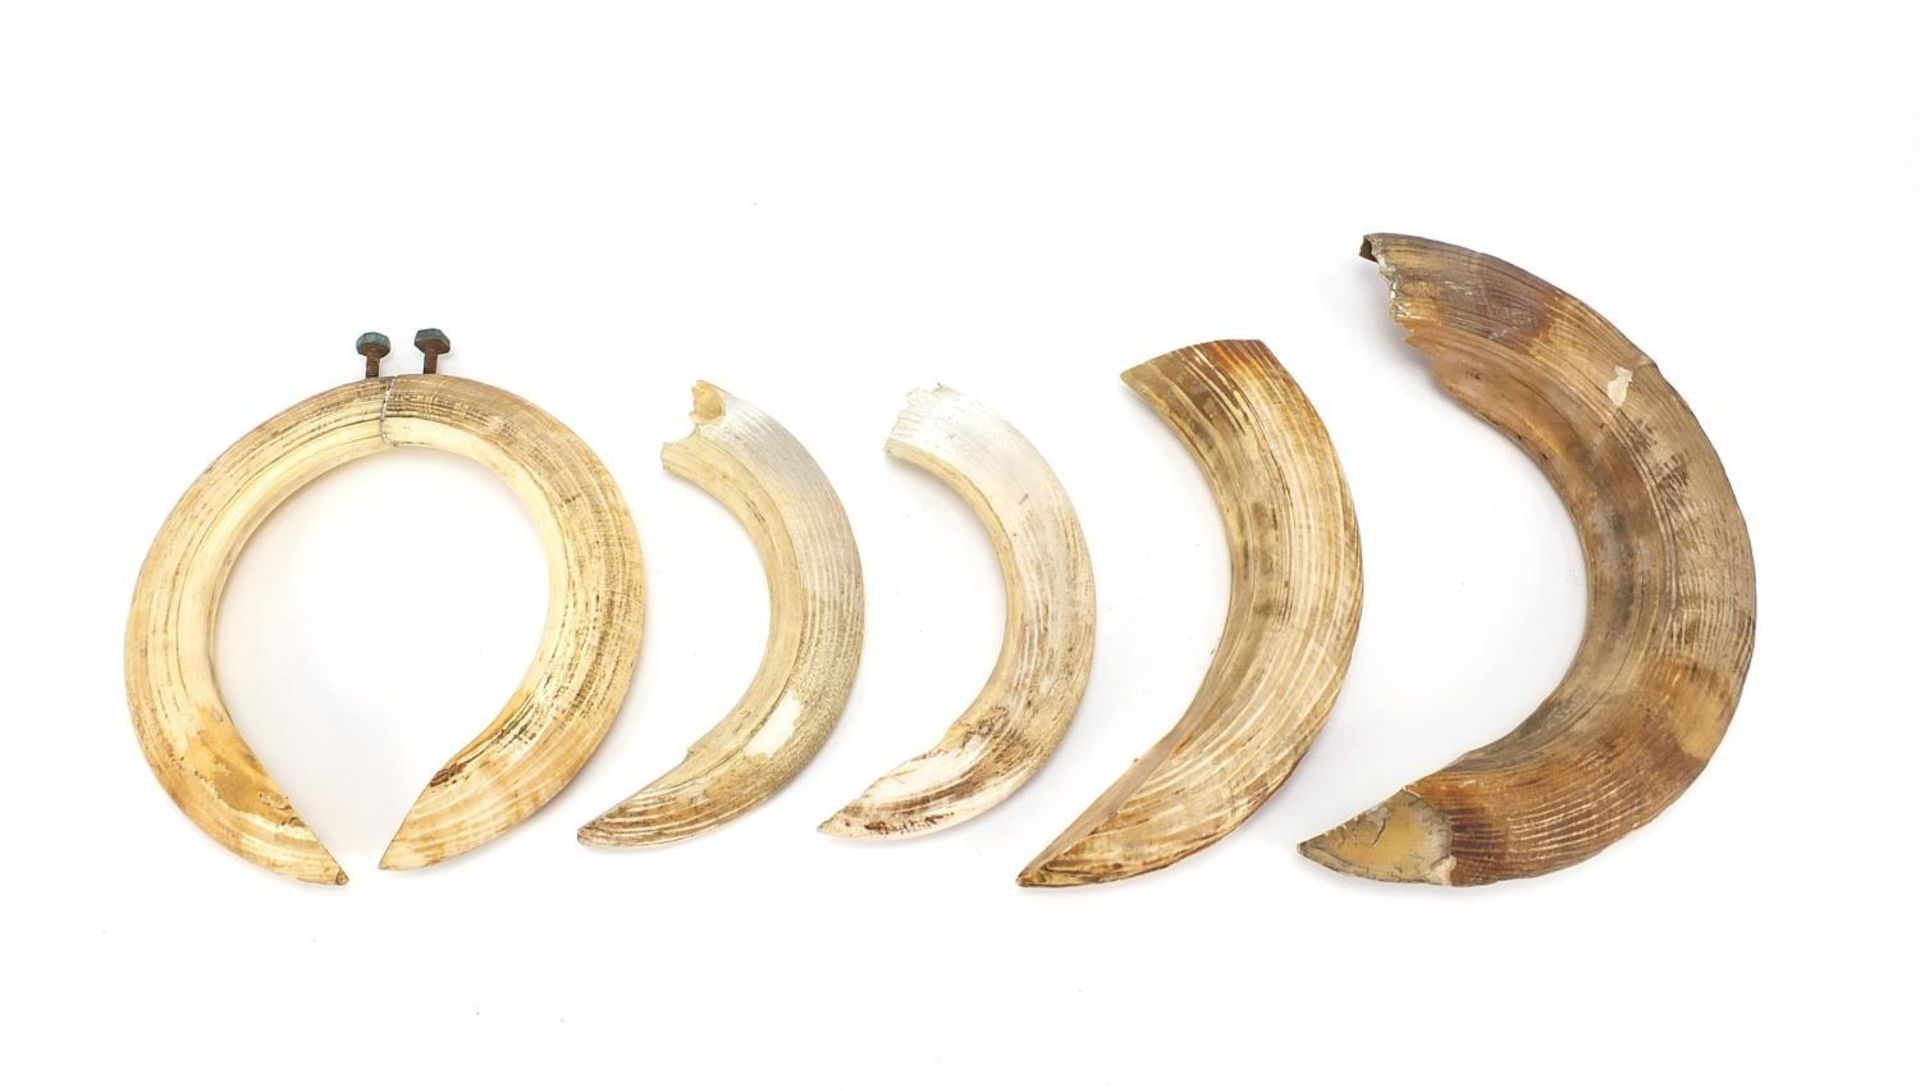 Six hippopotamus ivory teeth, the largest 33.5cm in length : - Image 4 of 6